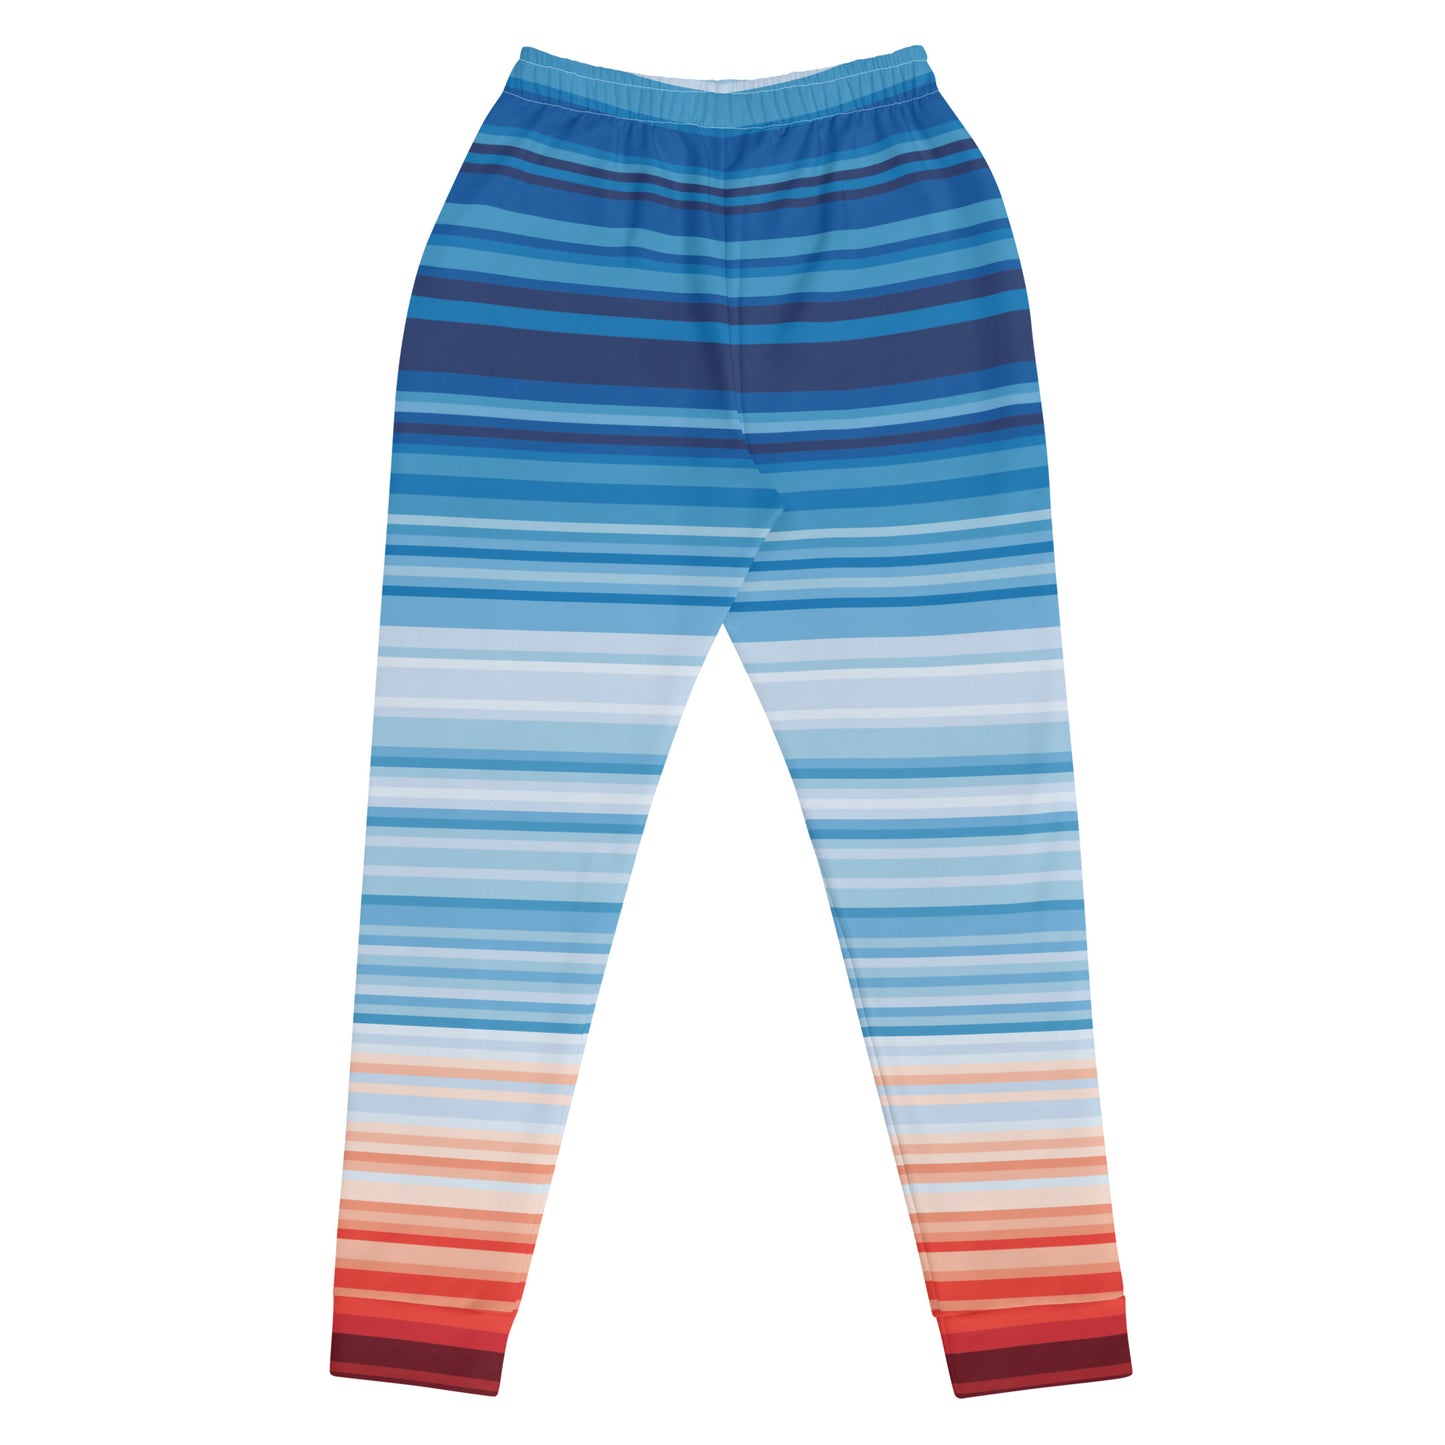 Climate Change Global Warming Stripes - Sustainably Made Women's Joggers